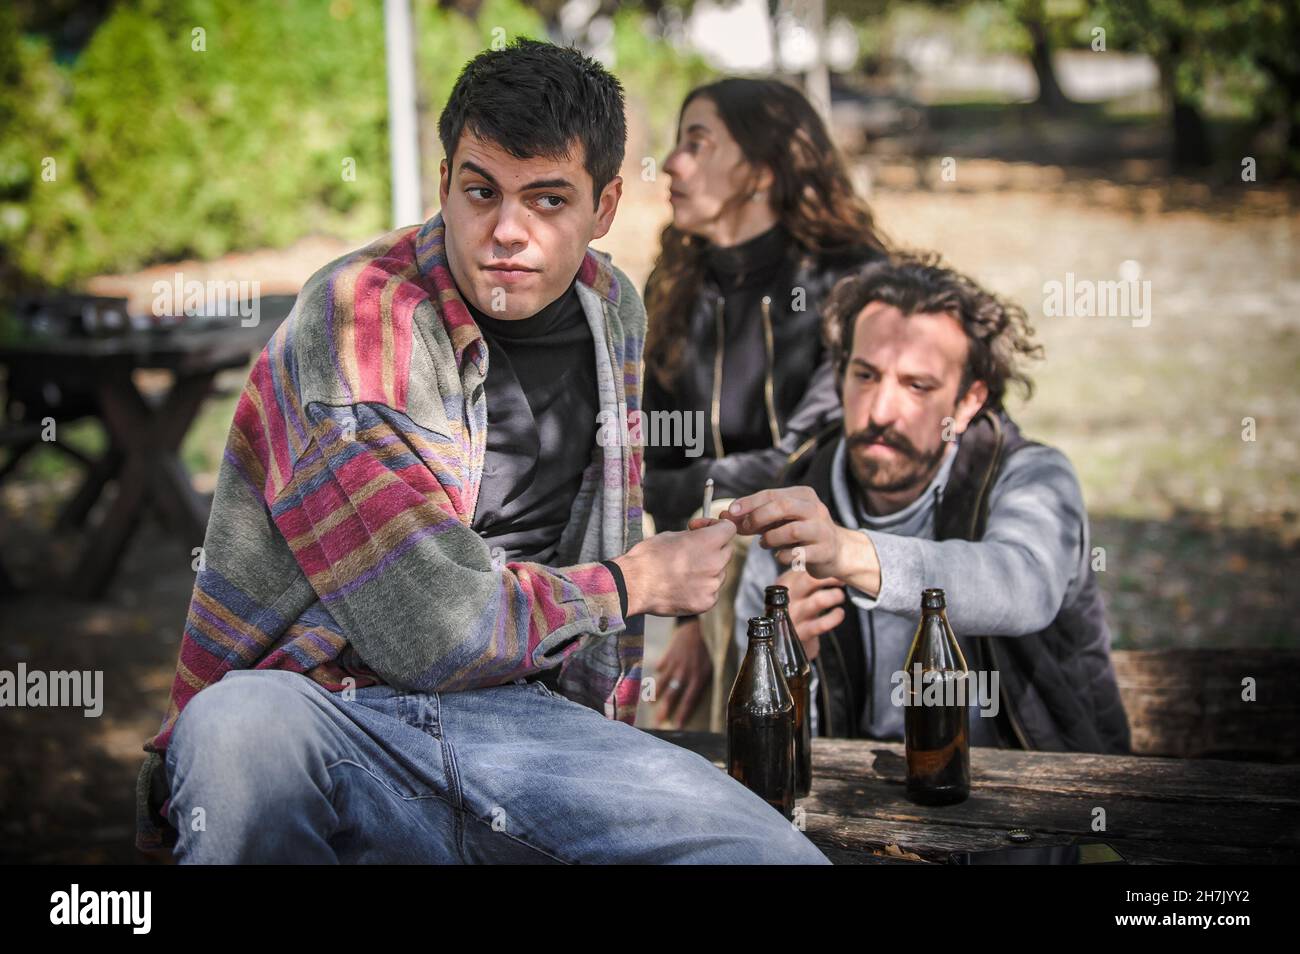 Young friends keep watch, look around and try to hide while gives from hand to hand each other ganja joint in public park outdoor. Smoking cannabis ma Stock Photo